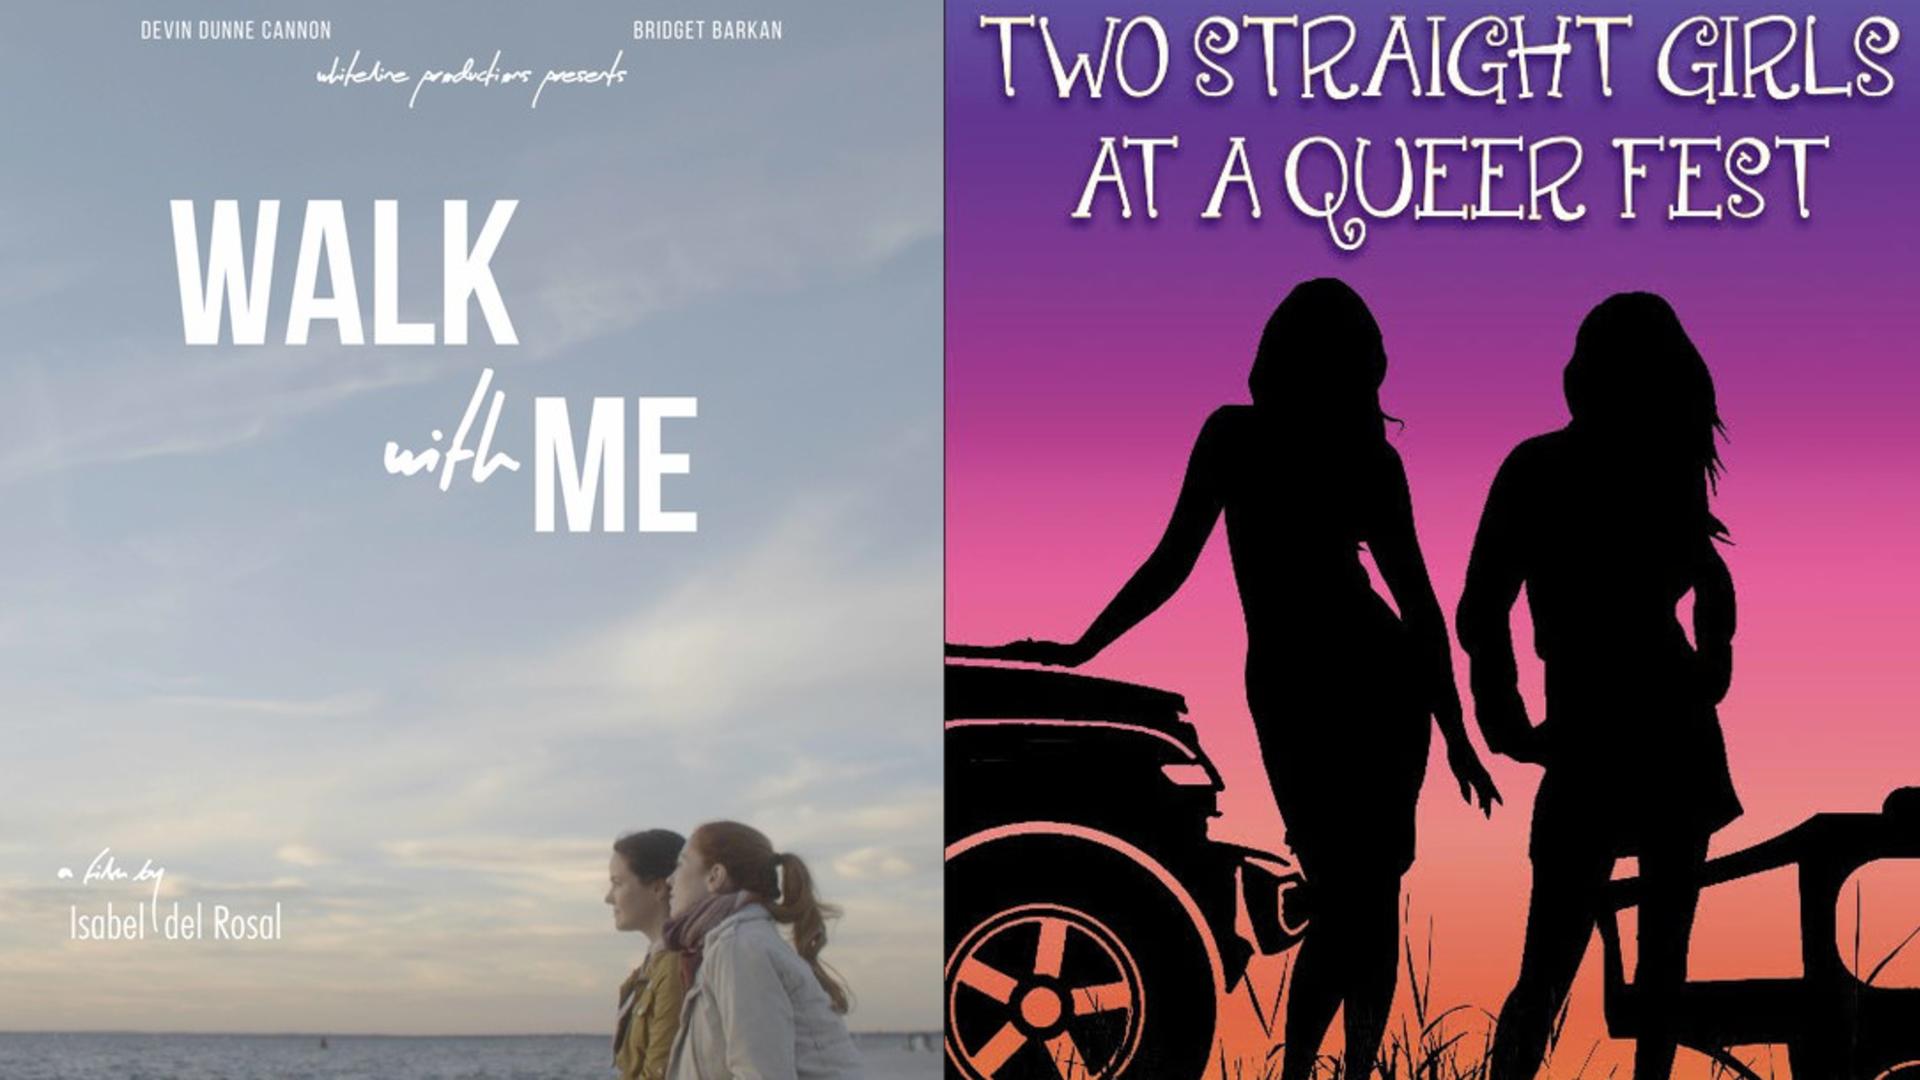 WALK WITH ME & TWO STRAIGHT GIRLS AT A QUEER FEST: Live Conversation and Q&A